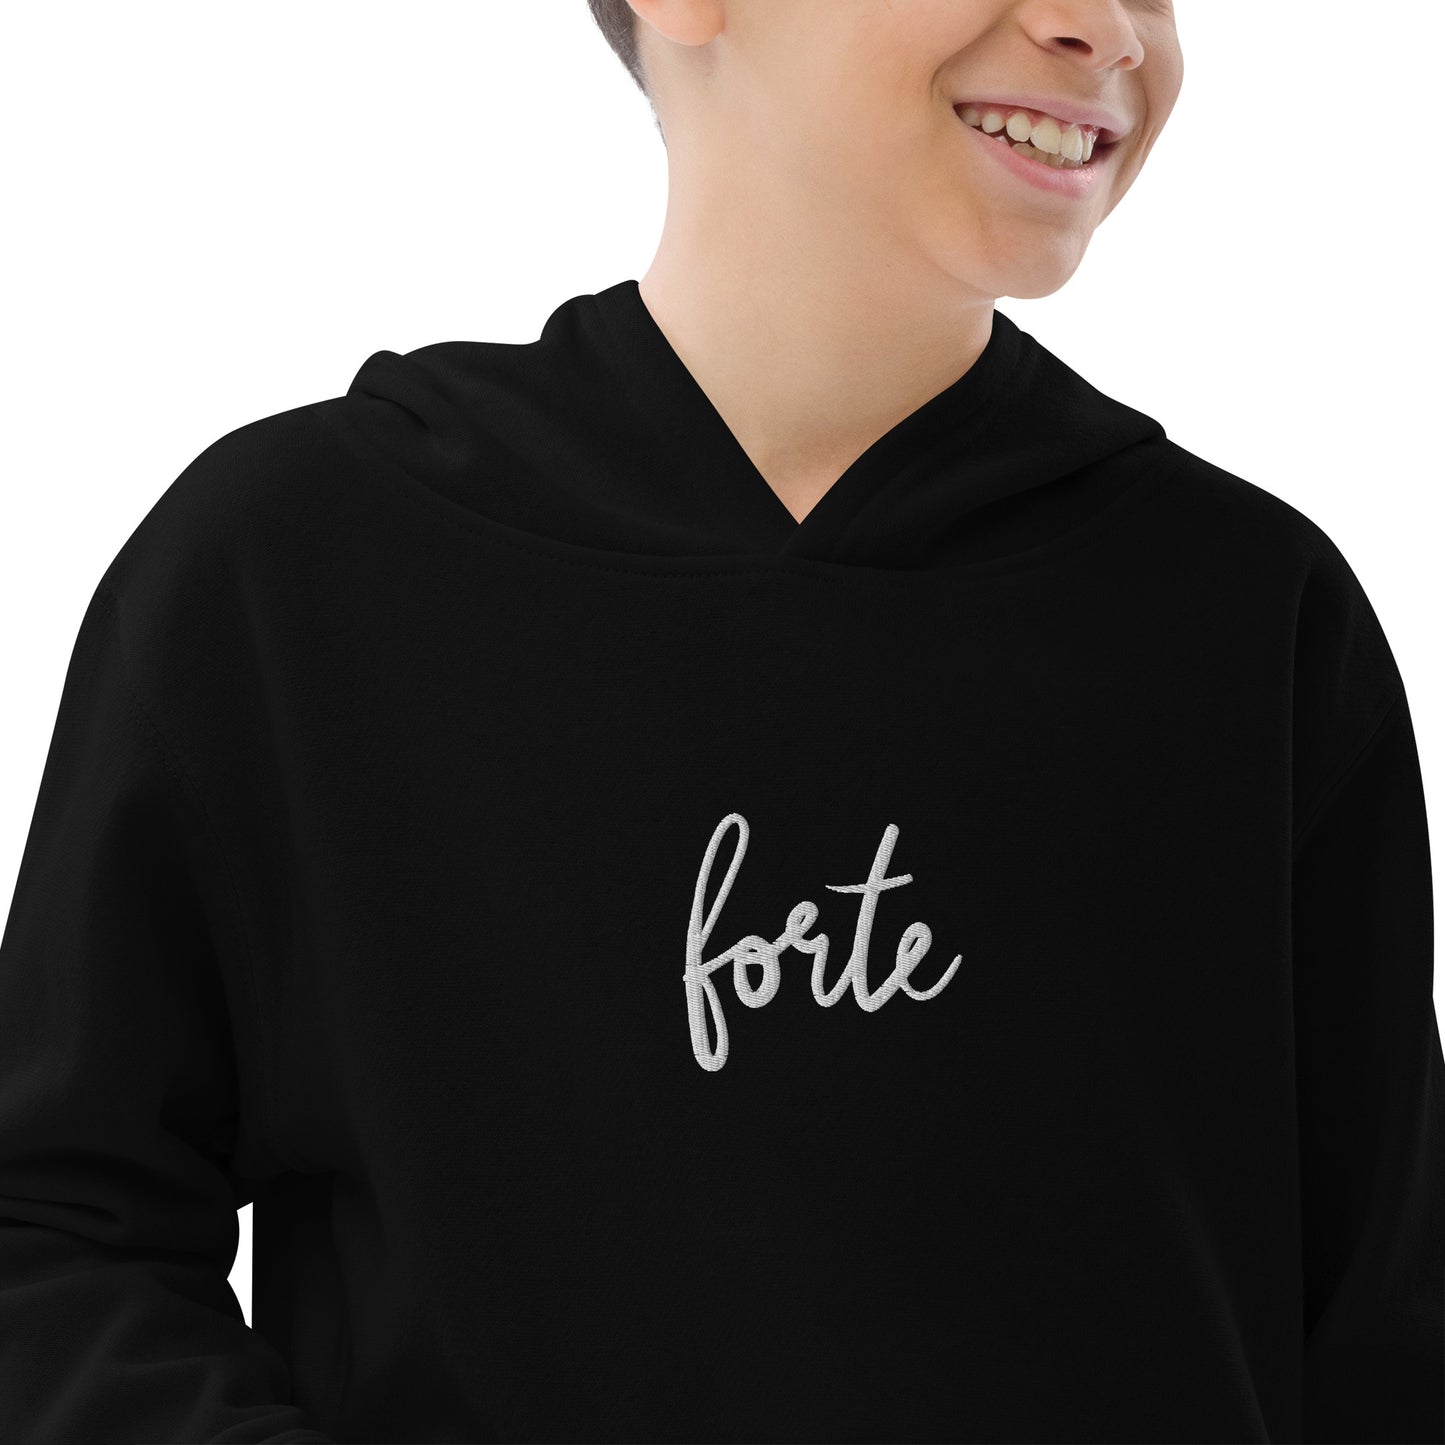 Youth / Kids - Embroidered fleece hoodie